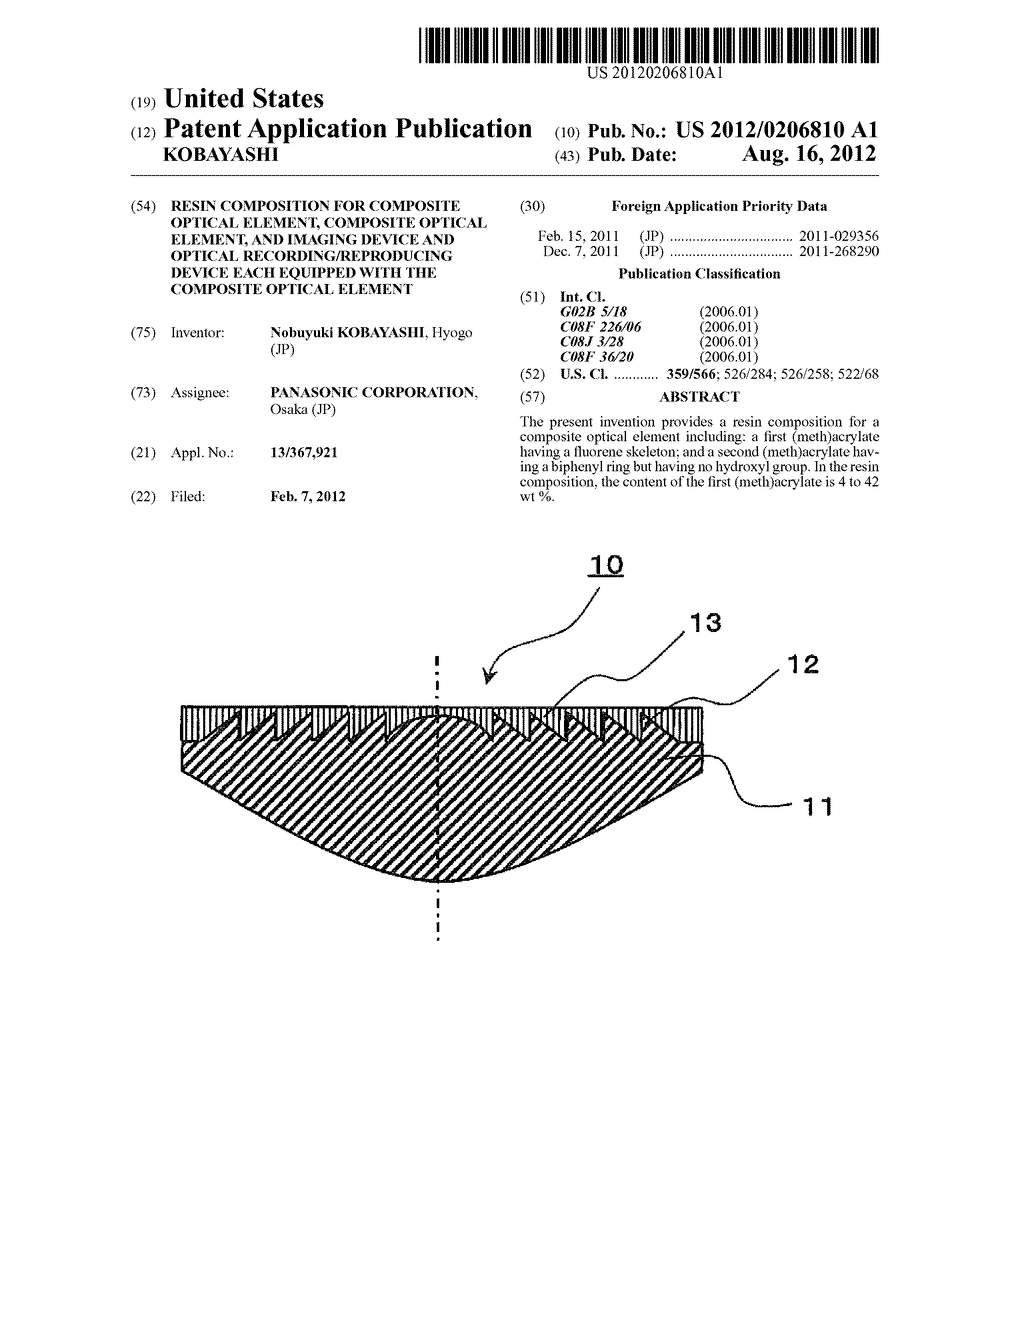 RESIN COMPOSITION FOR COMPOSITE OPTICAL ELEMENT, COMPOSITE OPTICAL     ELEMENT, AND IMAGING DEVICE AND OPTICAL RECORDING/REPRODUCING DEVICE EACH     EQUIPPED WITH THE COMPOSITE OPTICAL ELEMENT - diagram, schematic, and image 01